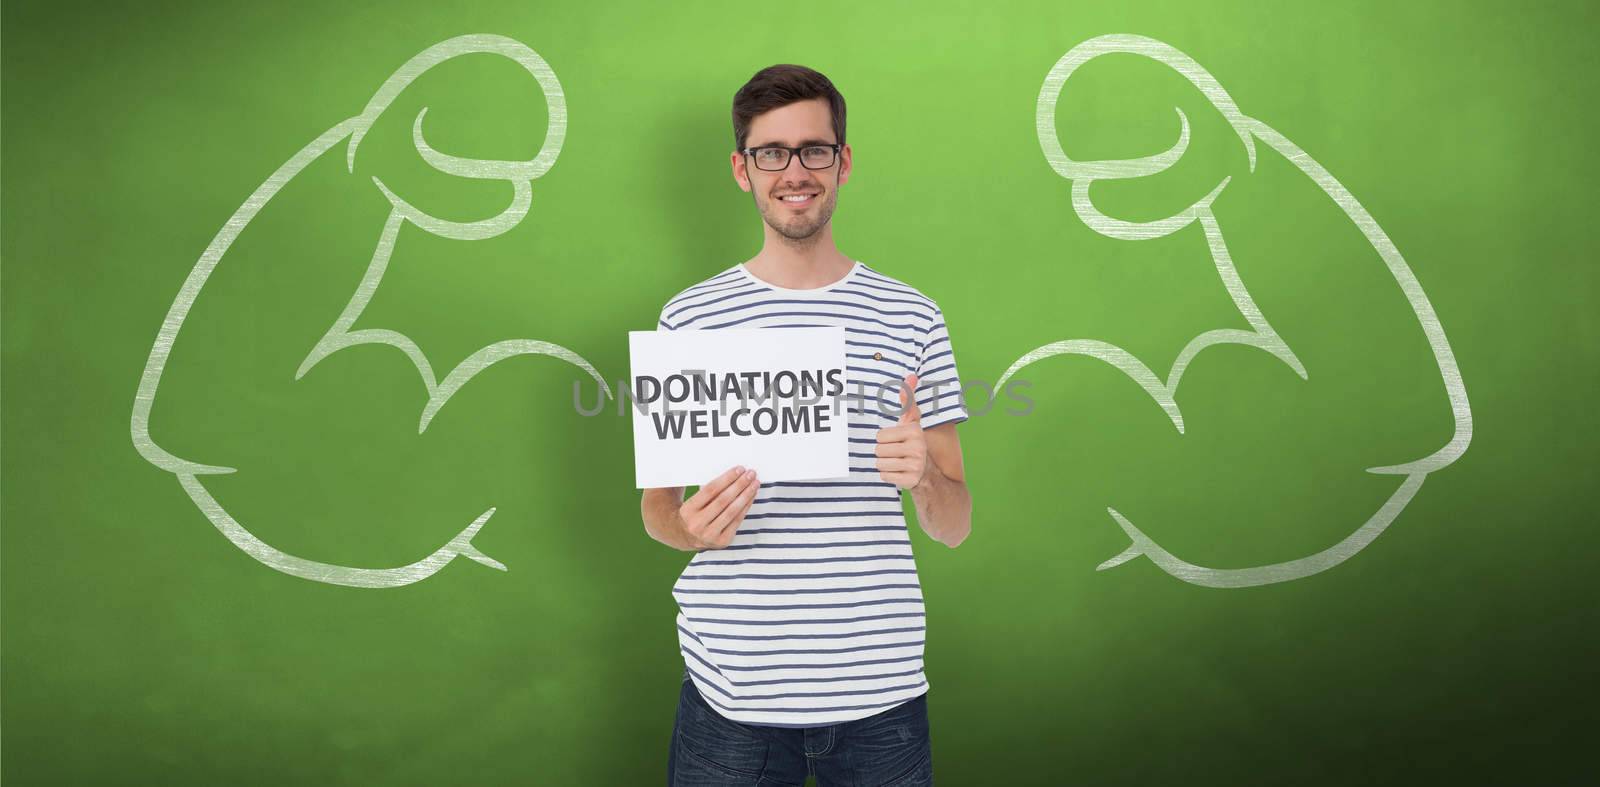 Man holding a donation welcome note while gesturing thumbs up against green chalkboard